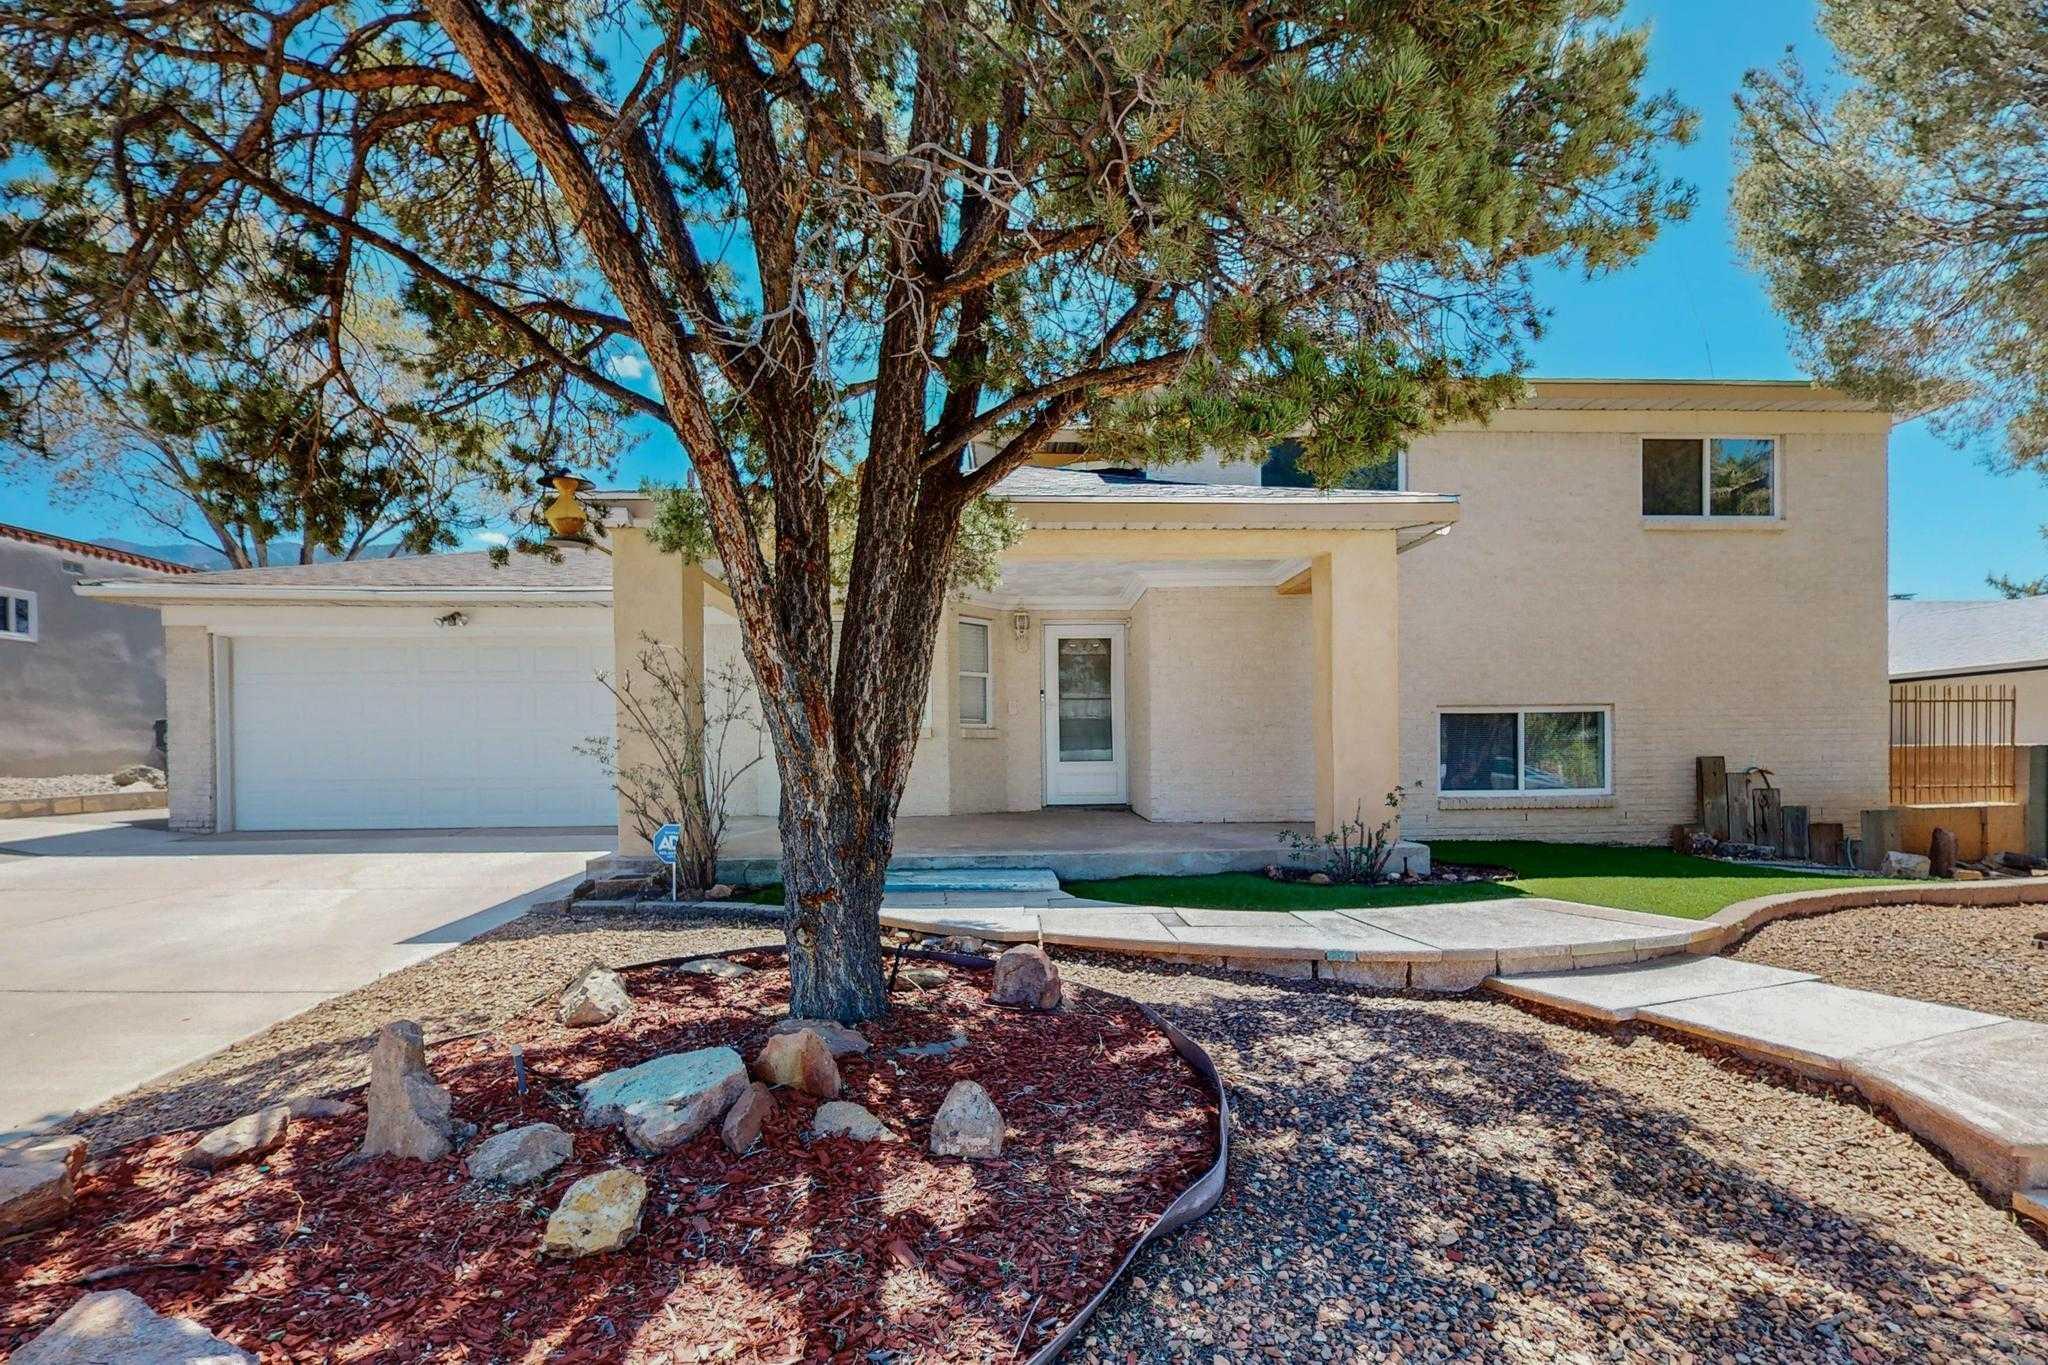 12124 Genoa, 1061247, Albuquerque, Detached,  for sale, Eric Pruitt, Berkshire Hathaway HomeServices New Mexico Properties